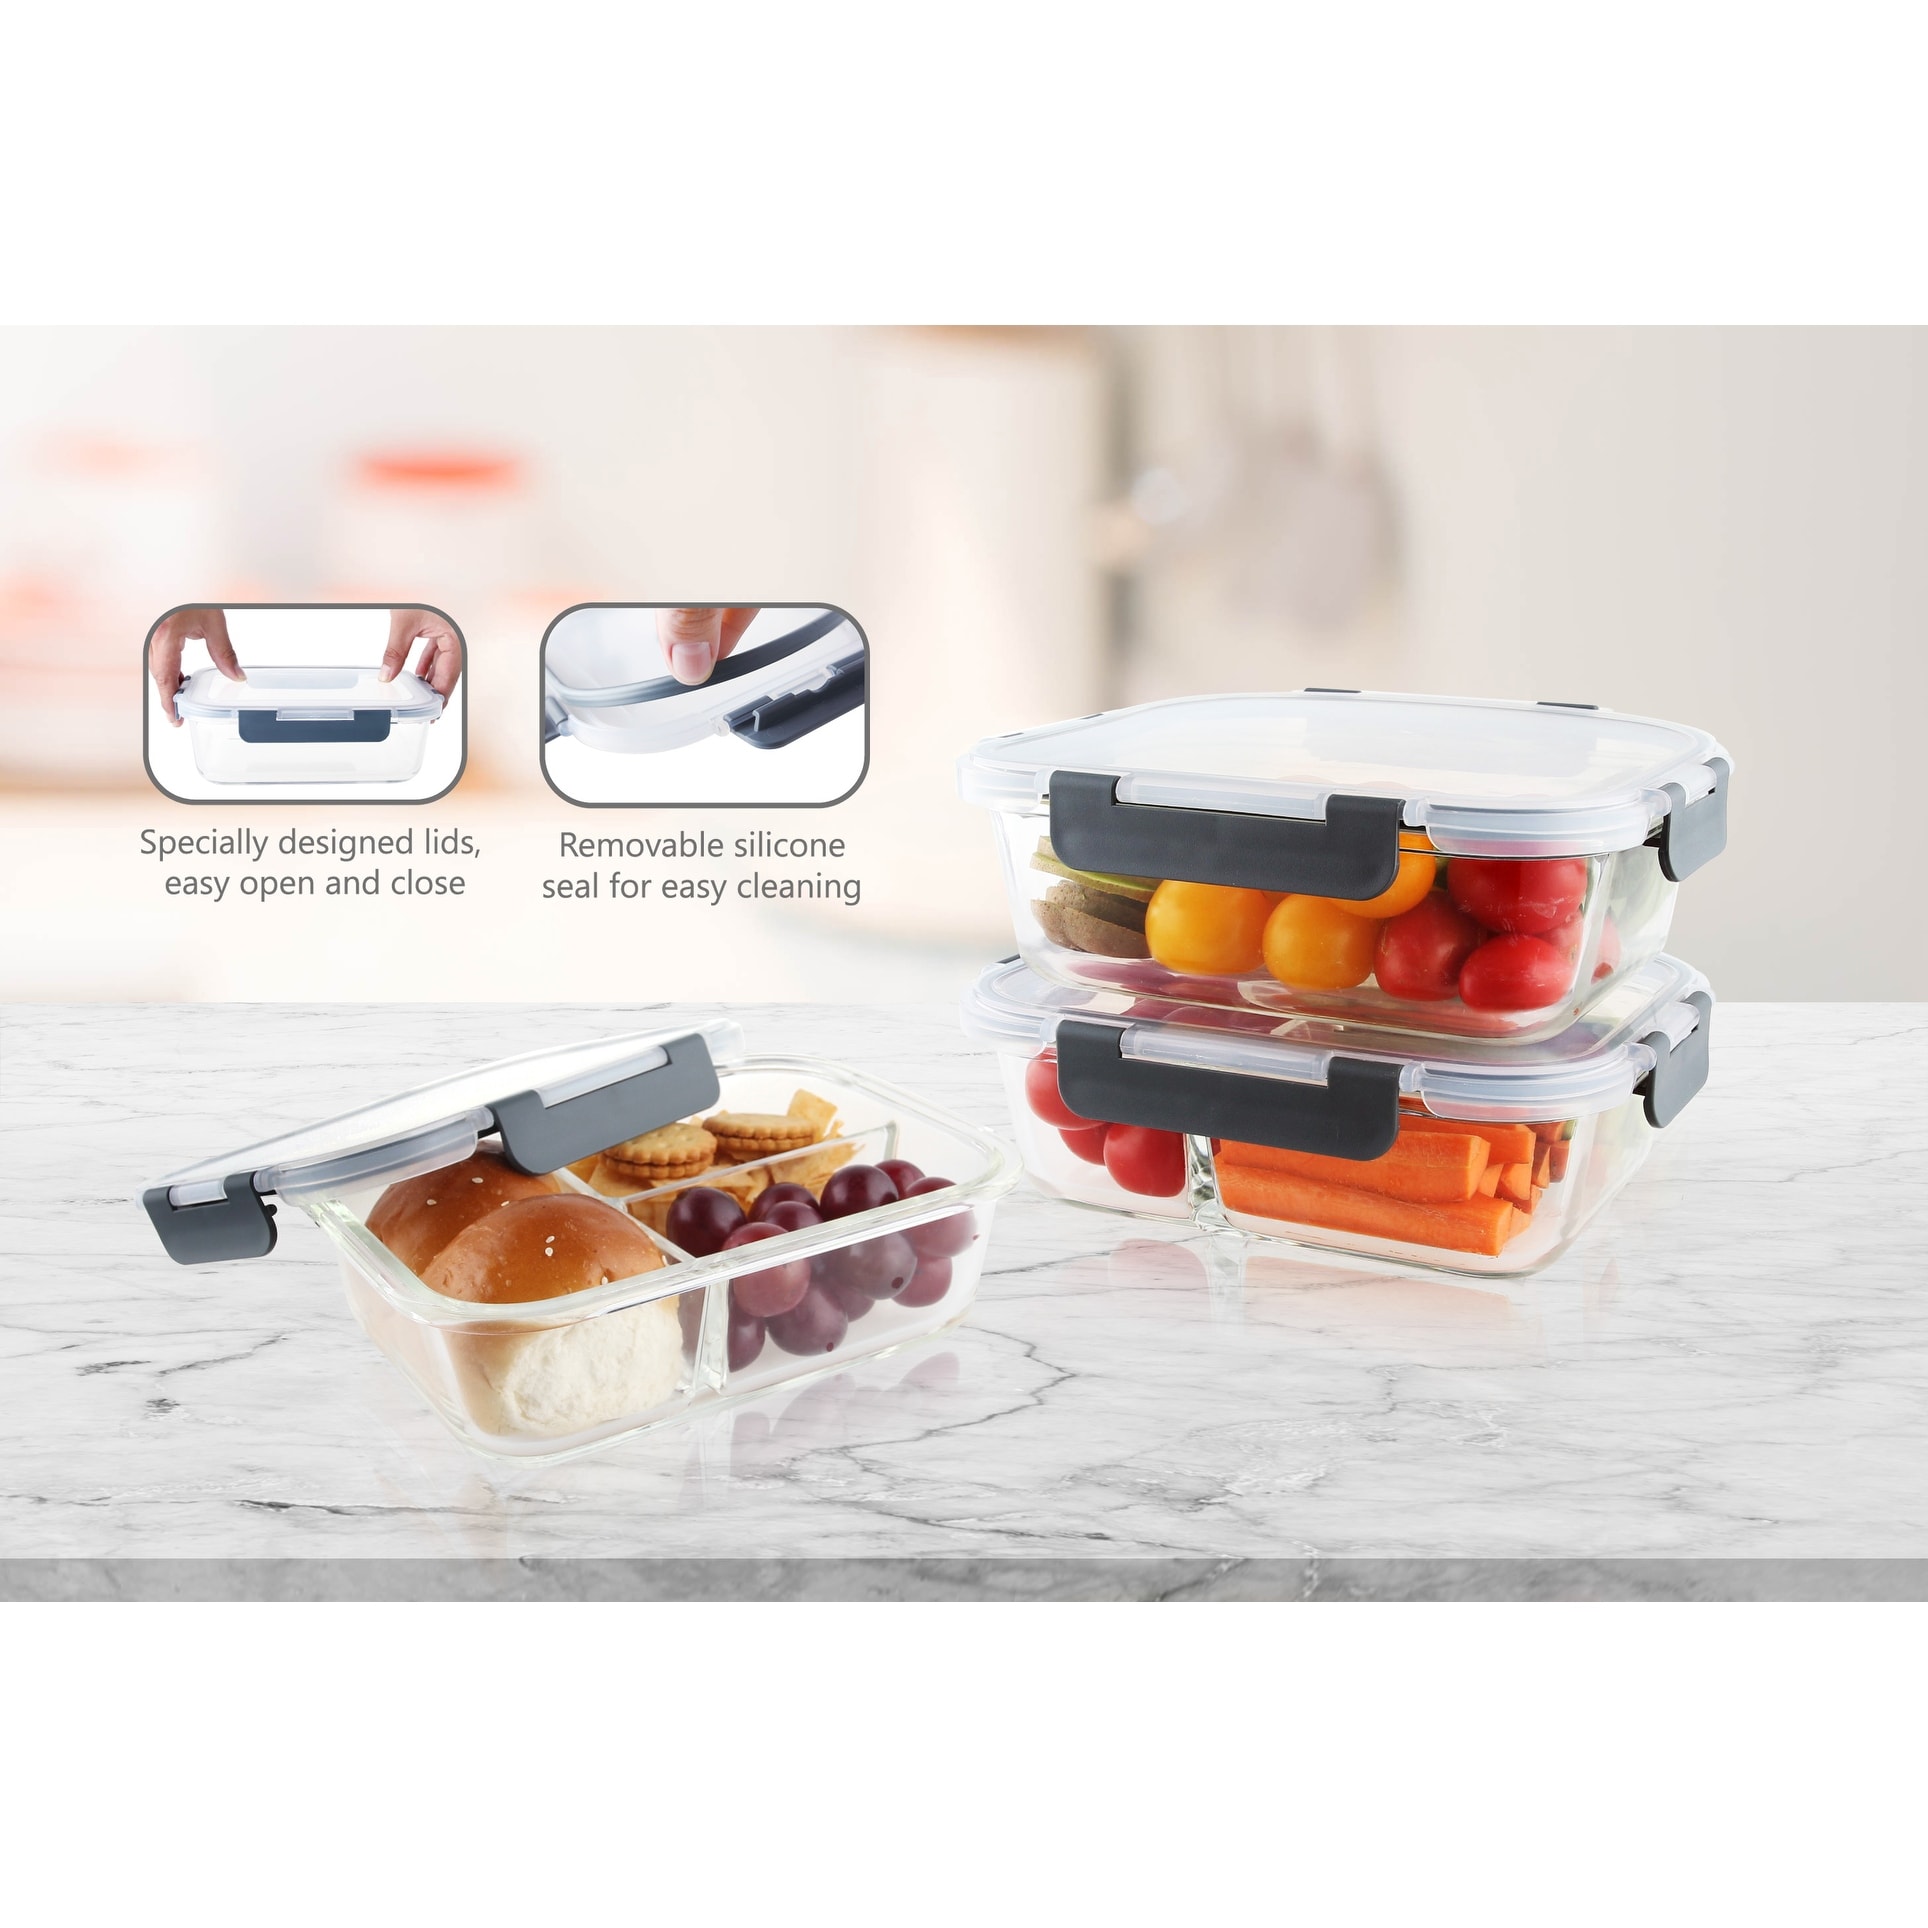 https://ak1.ostkcdn.com/images/products/is/images/direct/cc3ce92162734392e1b992f643fecf5a49afbdc0/Prime-Cook-RECTANGULAR-GLASS-FOOD-CONTAINER-WITH-LID-3-Piece-SET.jpg